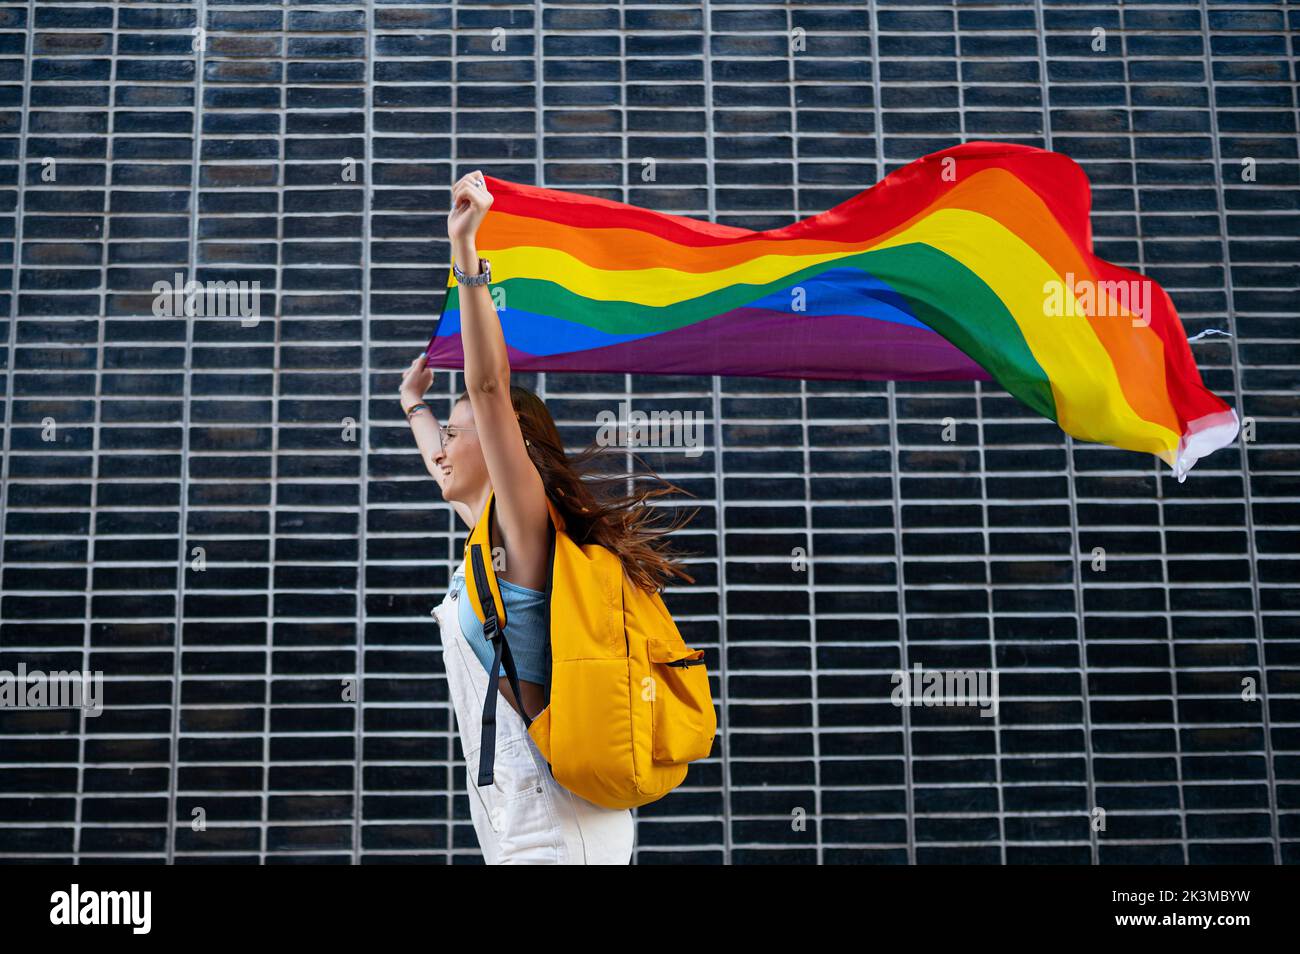 Low angle of young woman with backpack carrying rainbow flag in raised arms and running against black tiled wall during pride festival in city Stock Photo